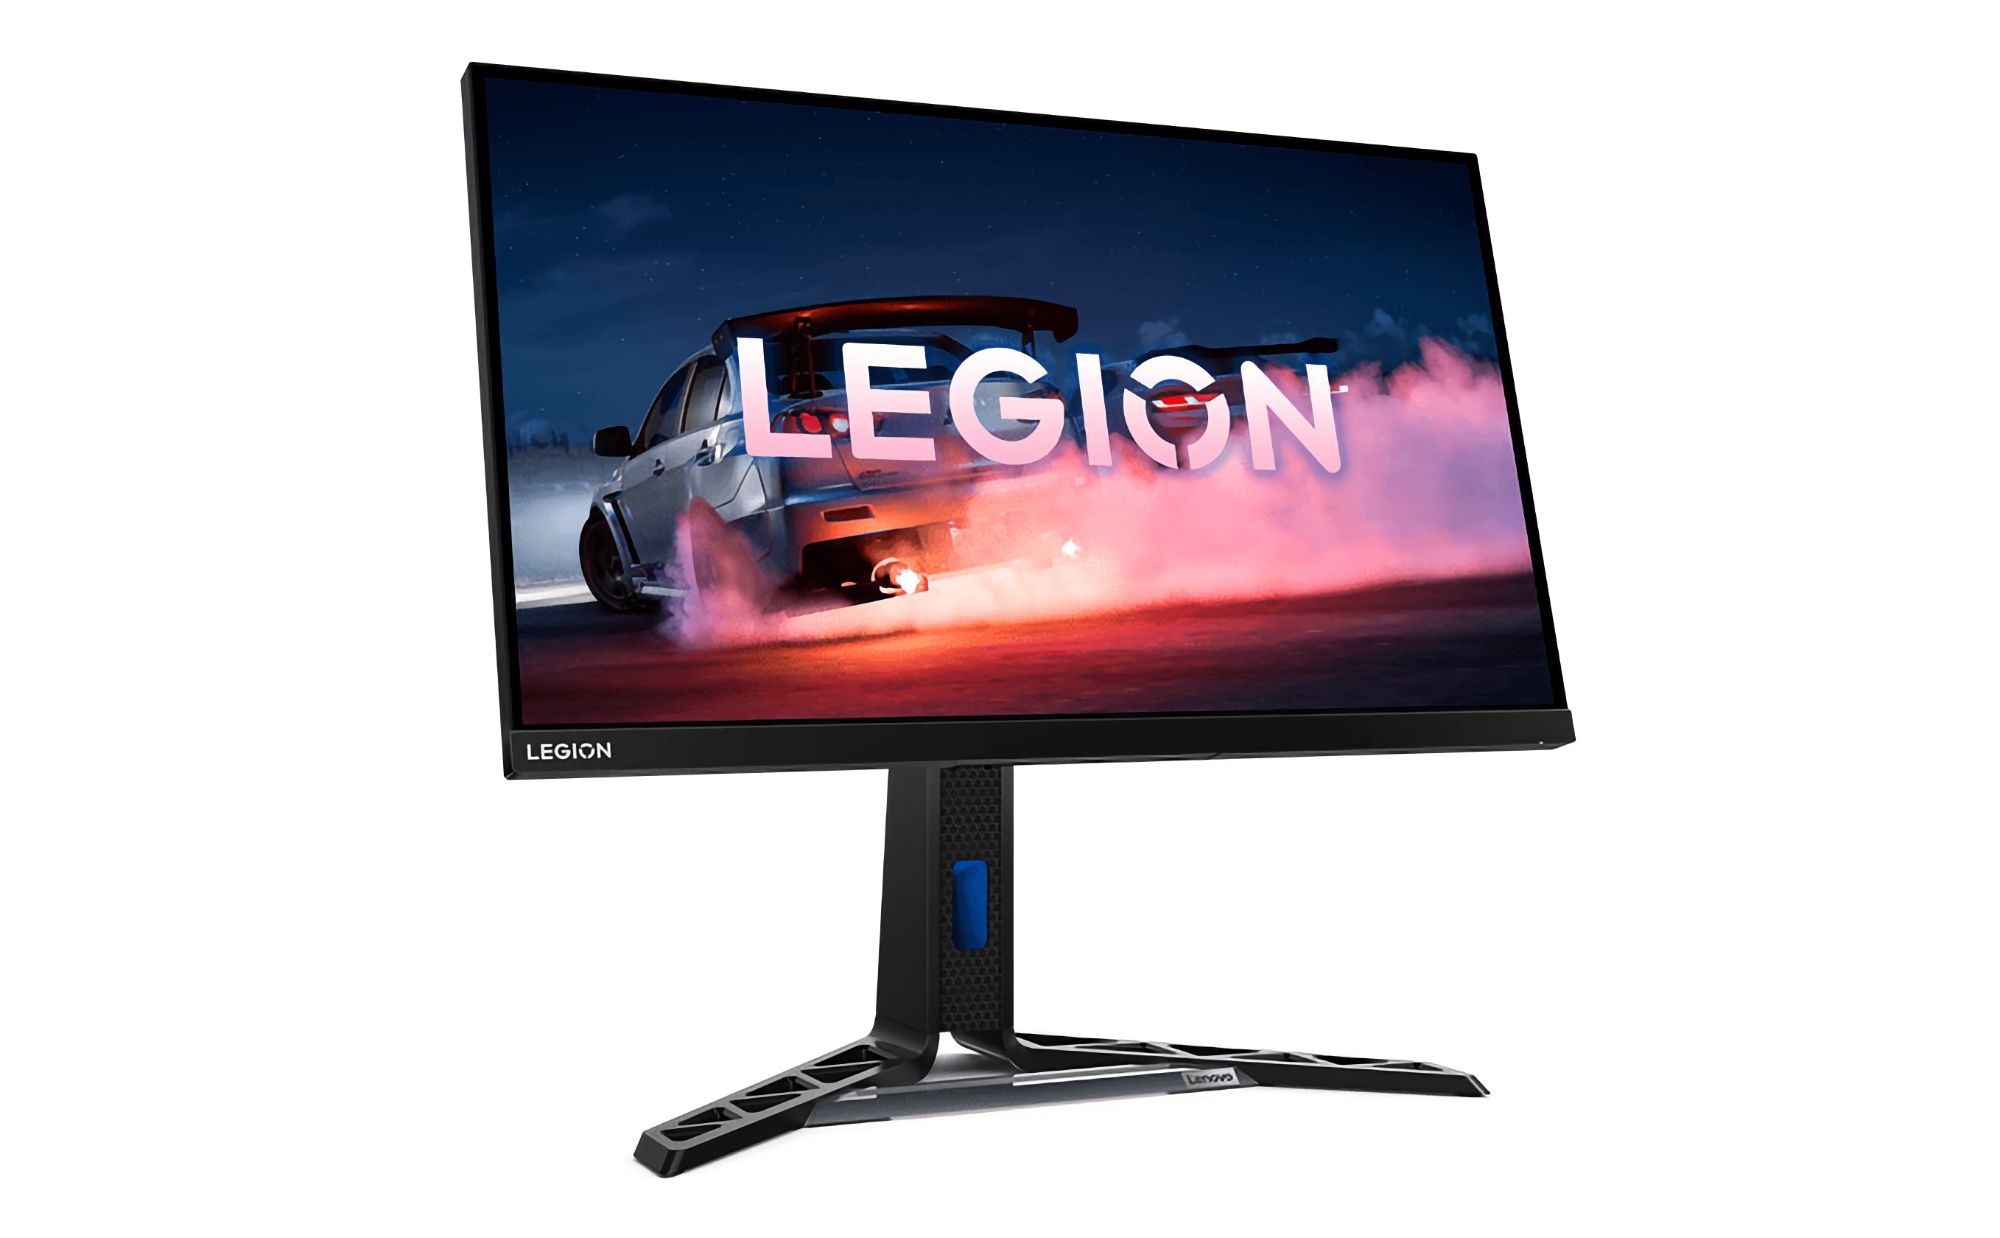 Lenovo Legion Y27q-30: gaming monitor with a 27-inch display and 180 Hz refresh rate